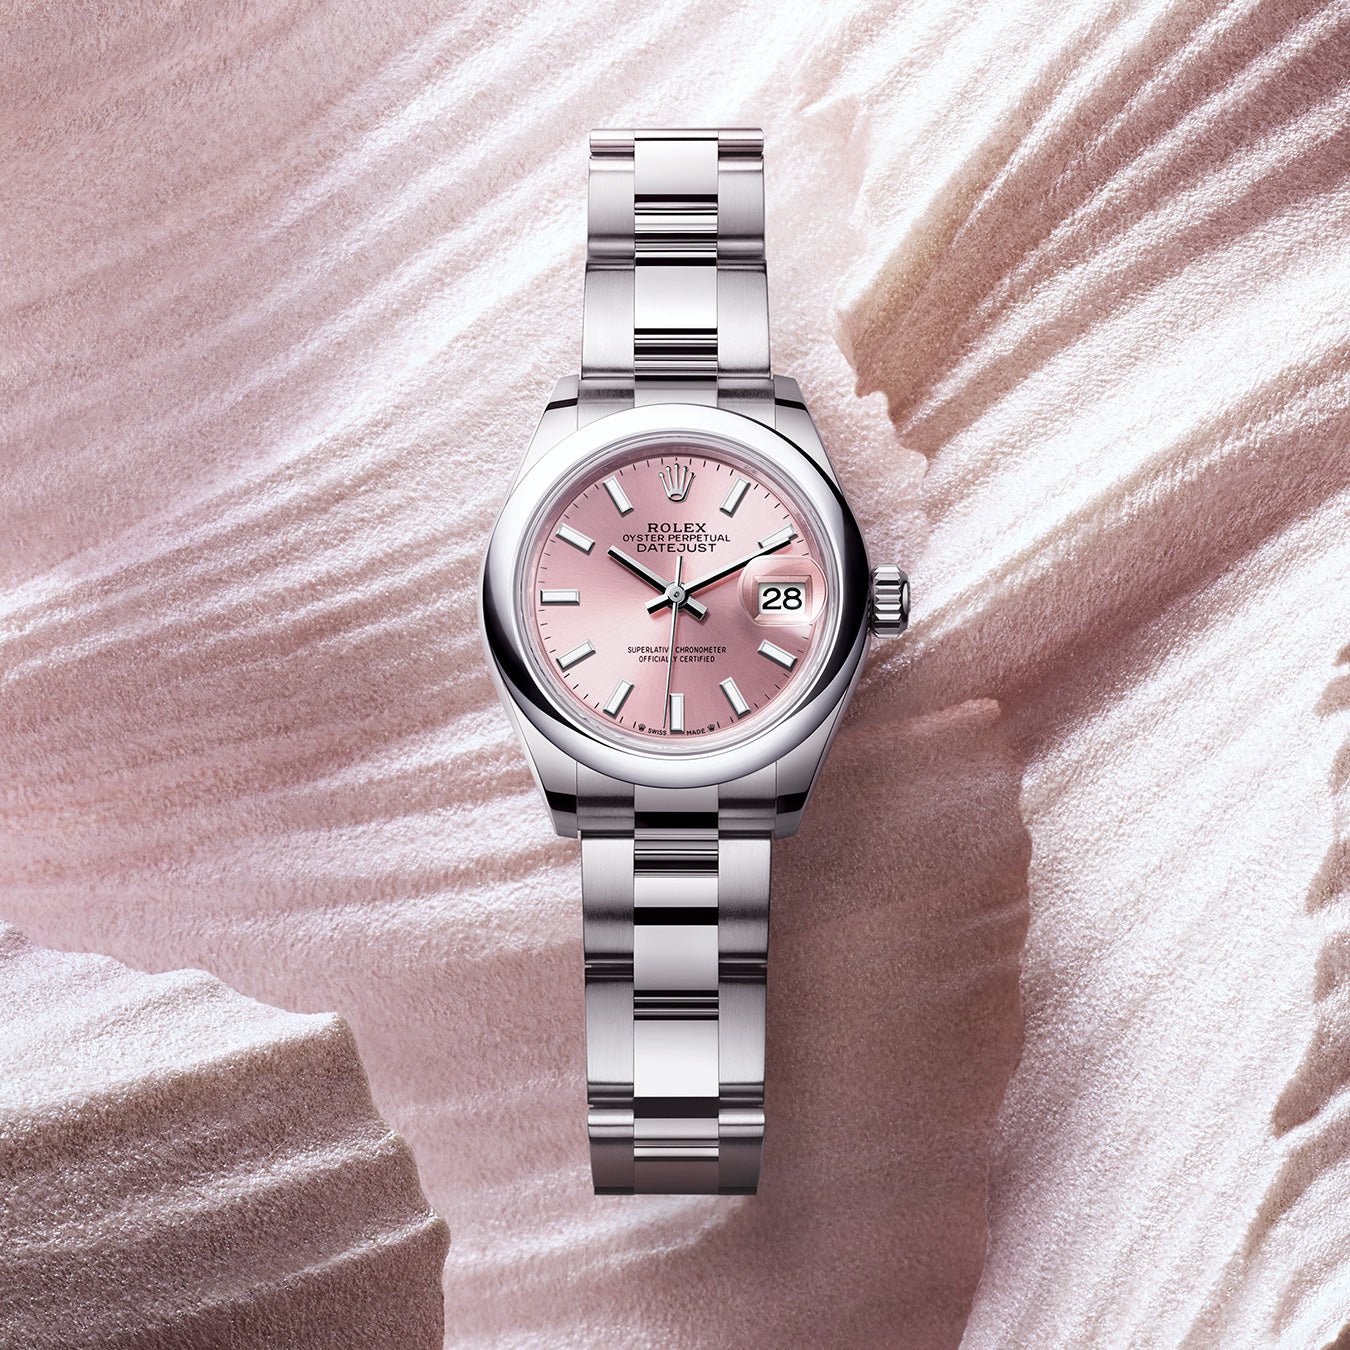 Rolex Lady-Datejust with Pink Dial at Fink's Jewelers